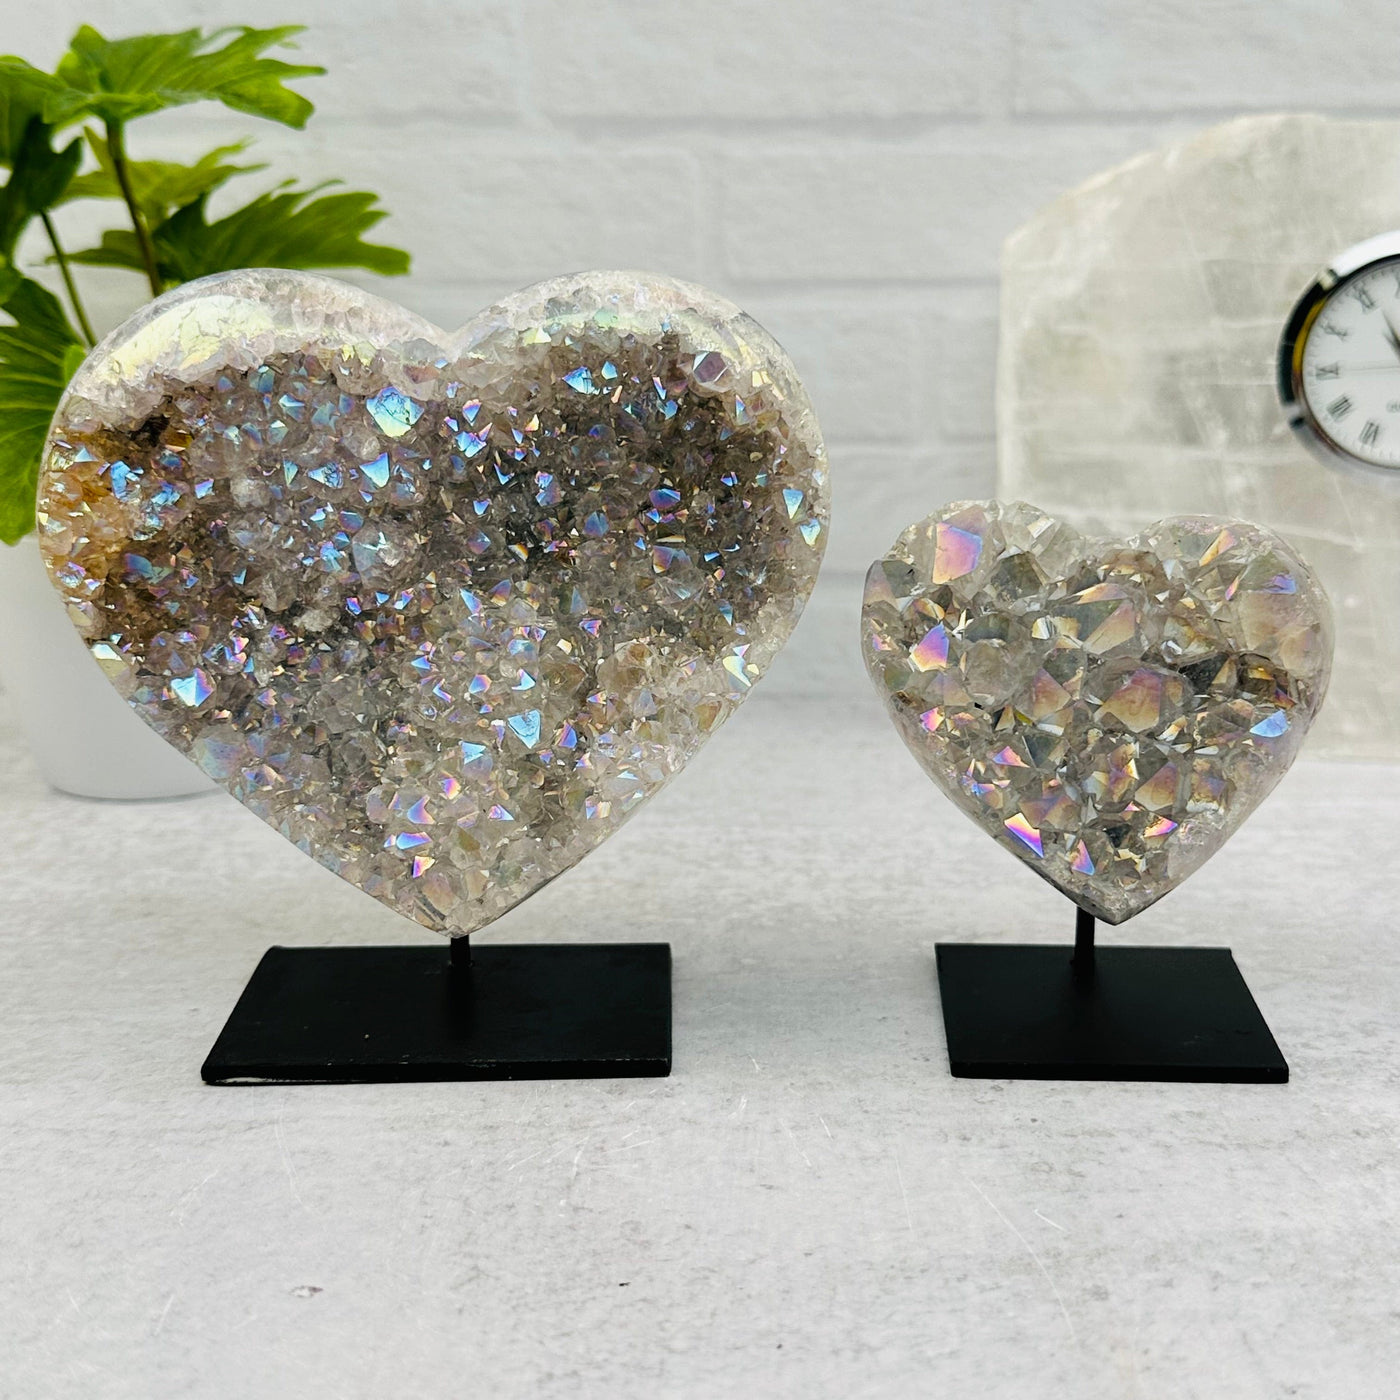 Amethyst Druzy Crystal Heart with Angel Aura on Metal Stand displayed as home decor